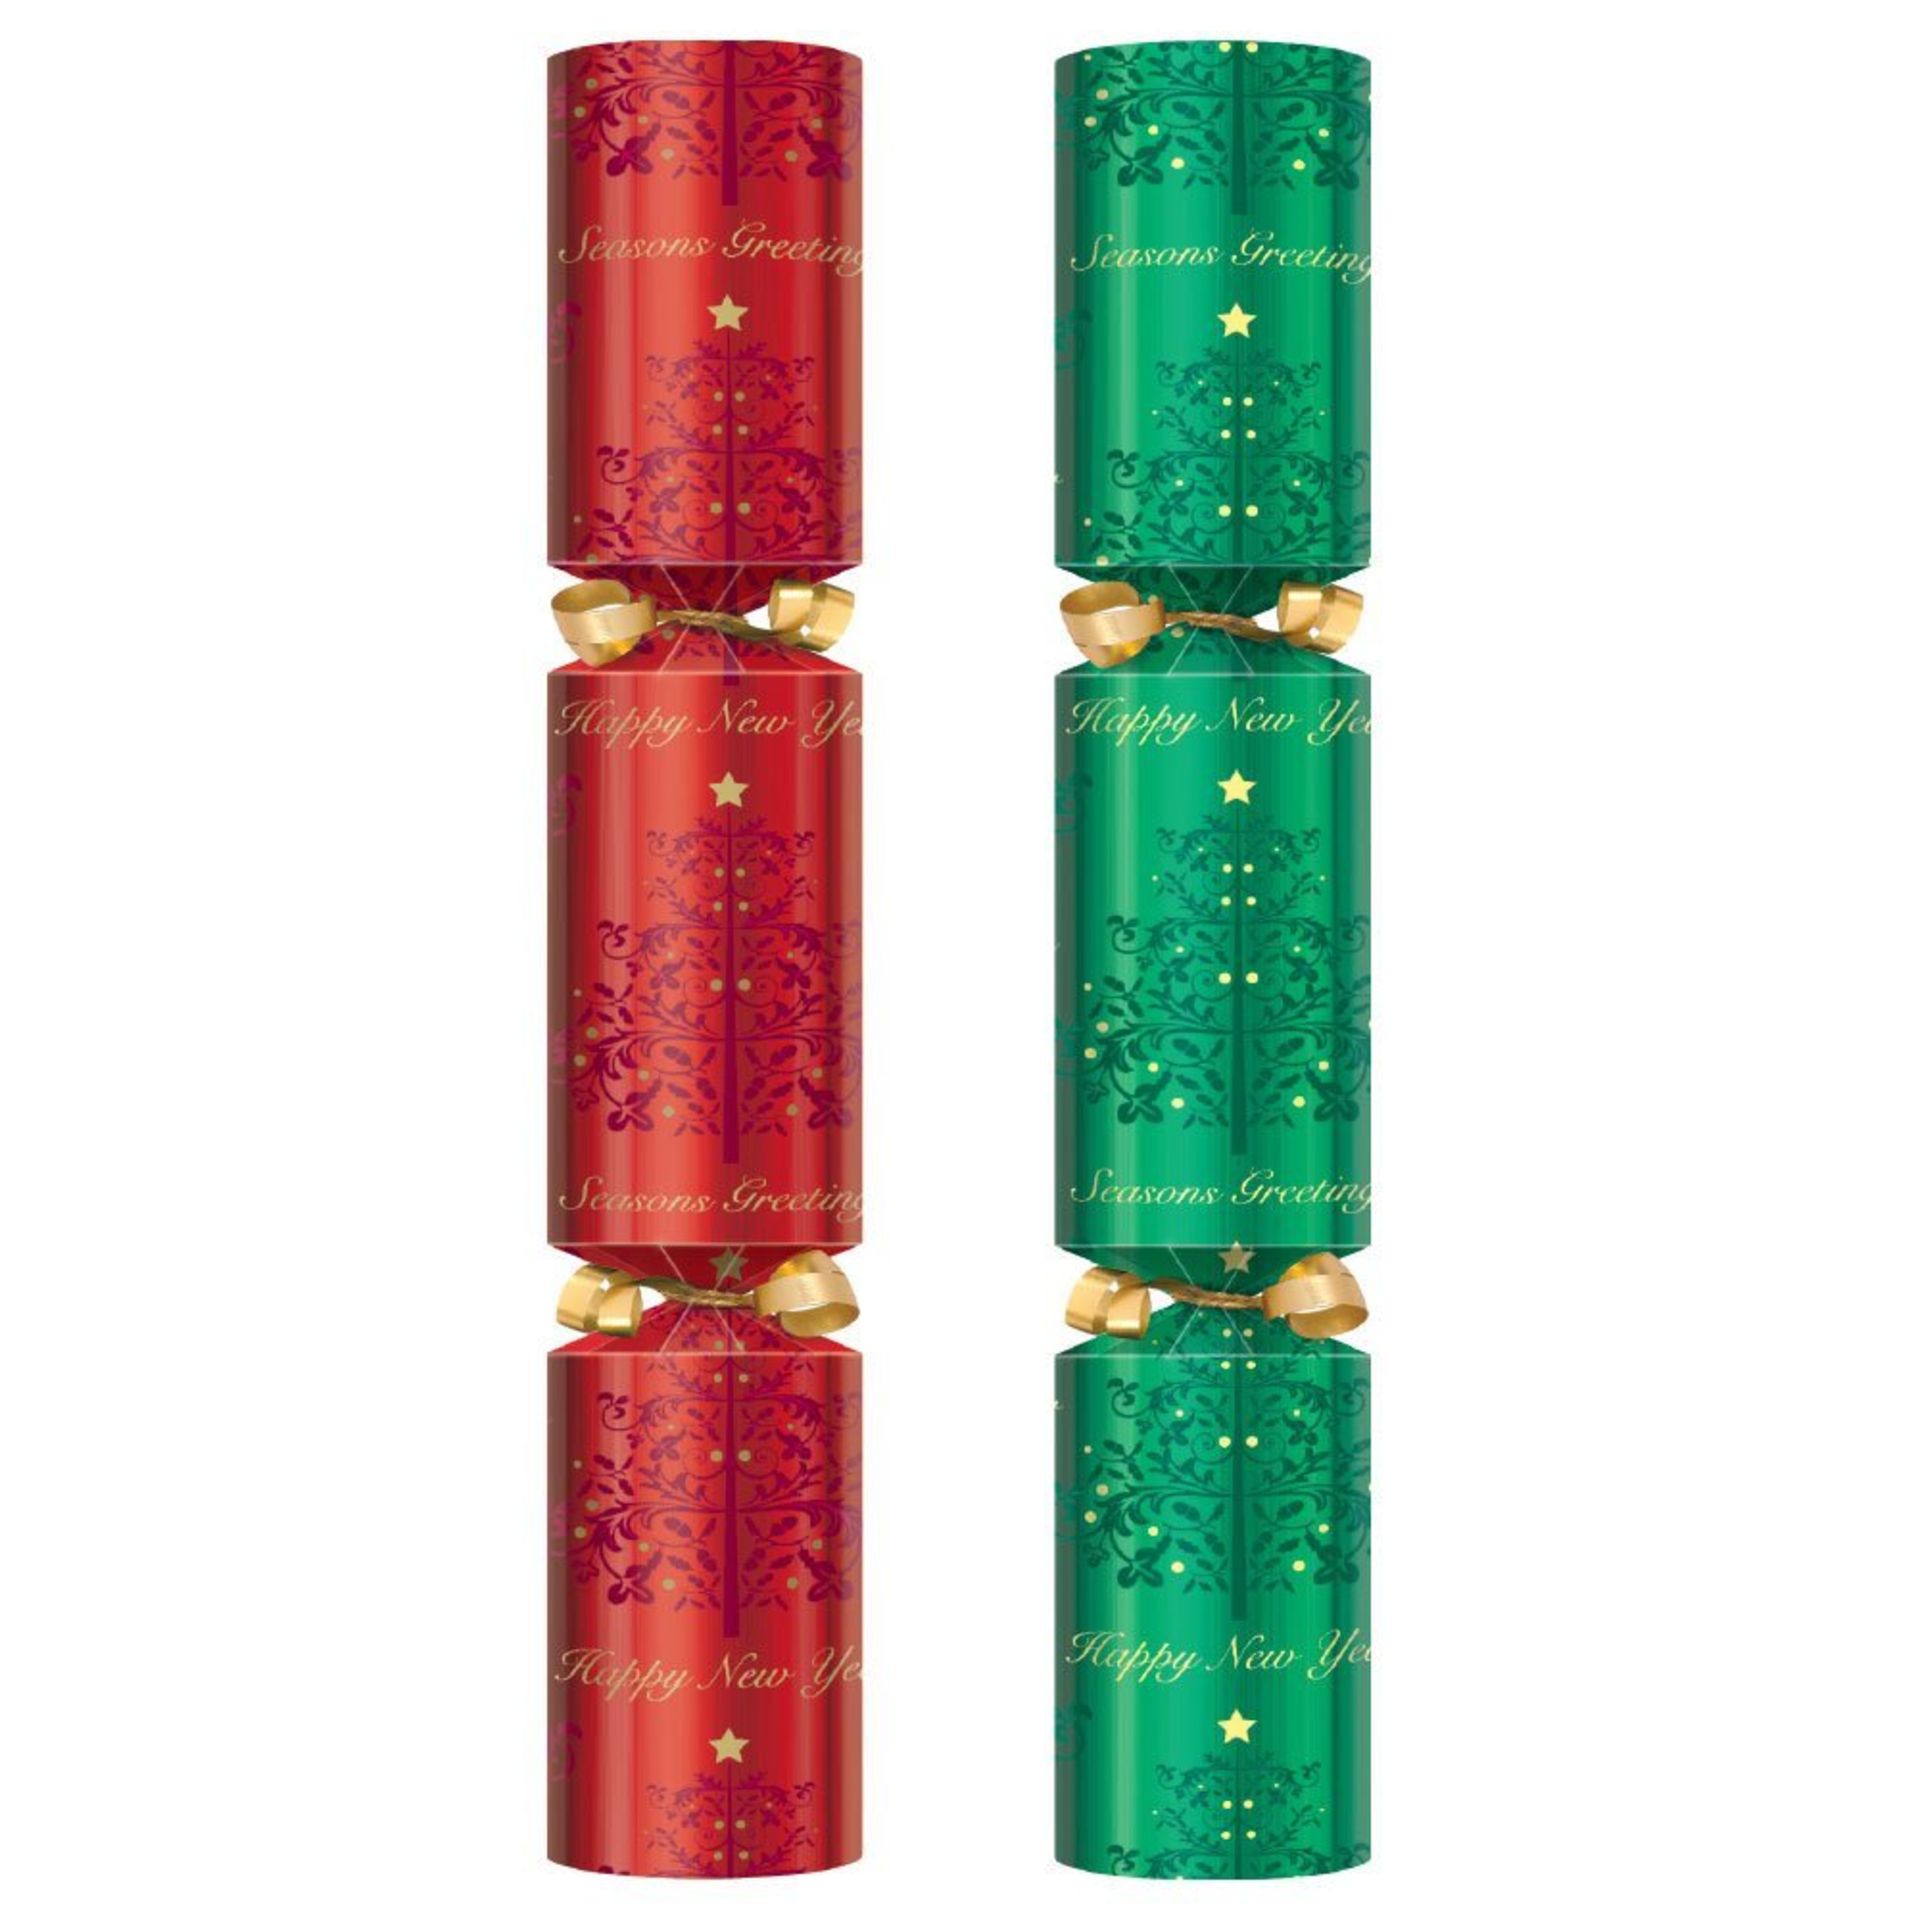 20 X Quality Swantex Christmas Crackers - Red & Green Holly Swirl. One box of Large Christmas